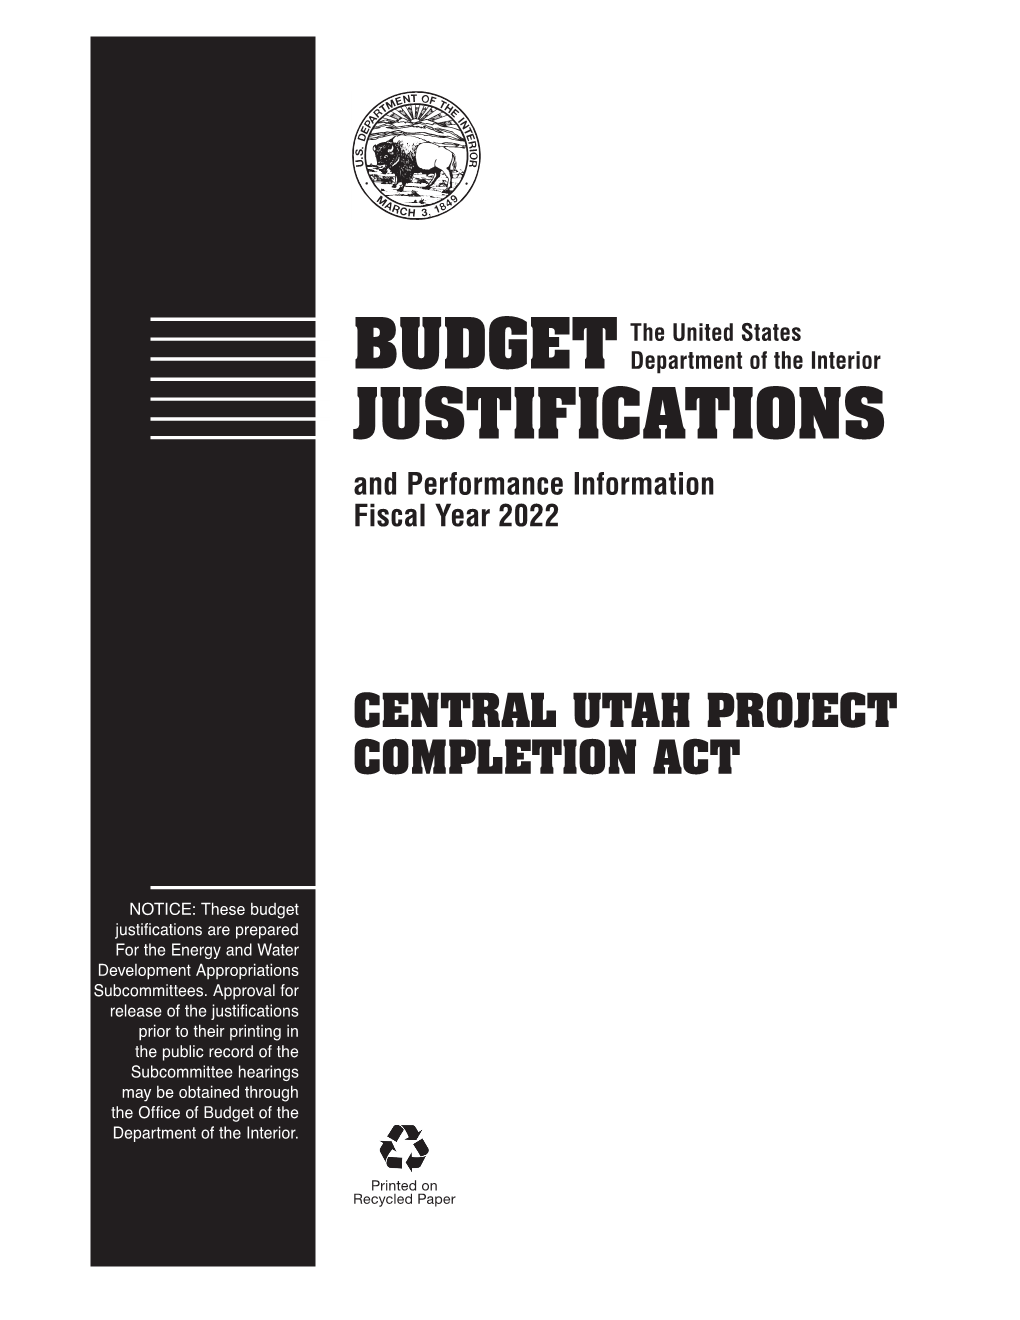 FY 2022 Central Utah Project Completion Act Budget Summary (Thousands of Dollars)